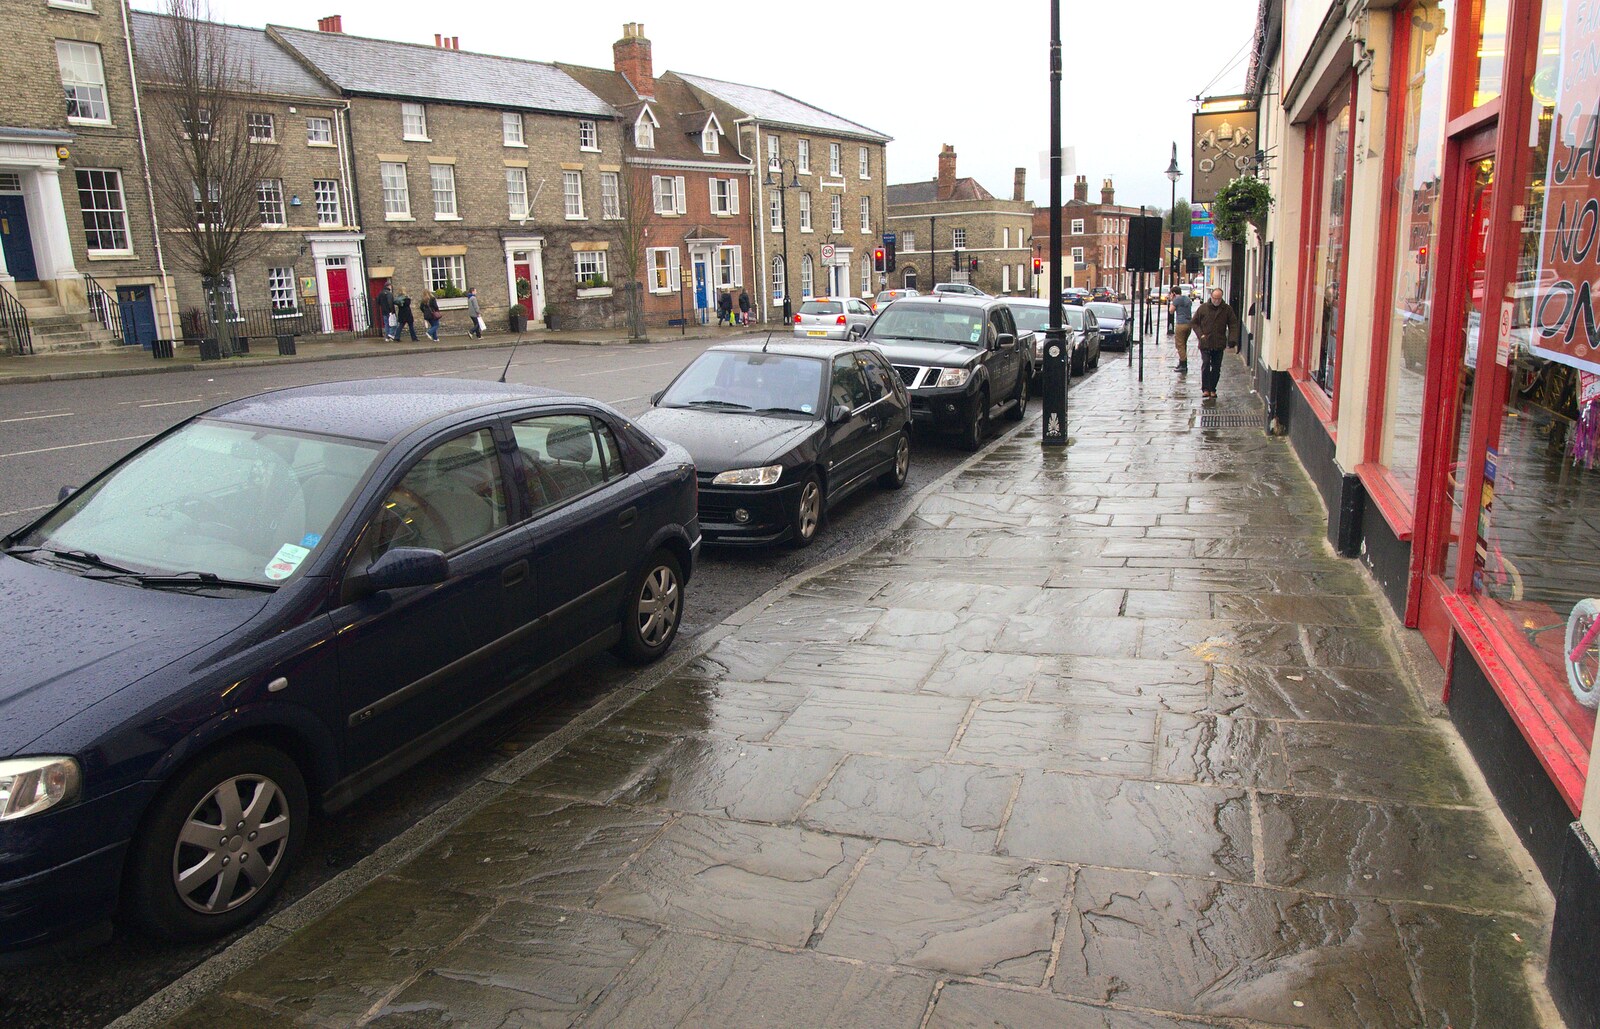 The wet flagstones of Bury from Pizza Express with Grandad, Bury St. Edmunds, Suffolk - 29th December 2011